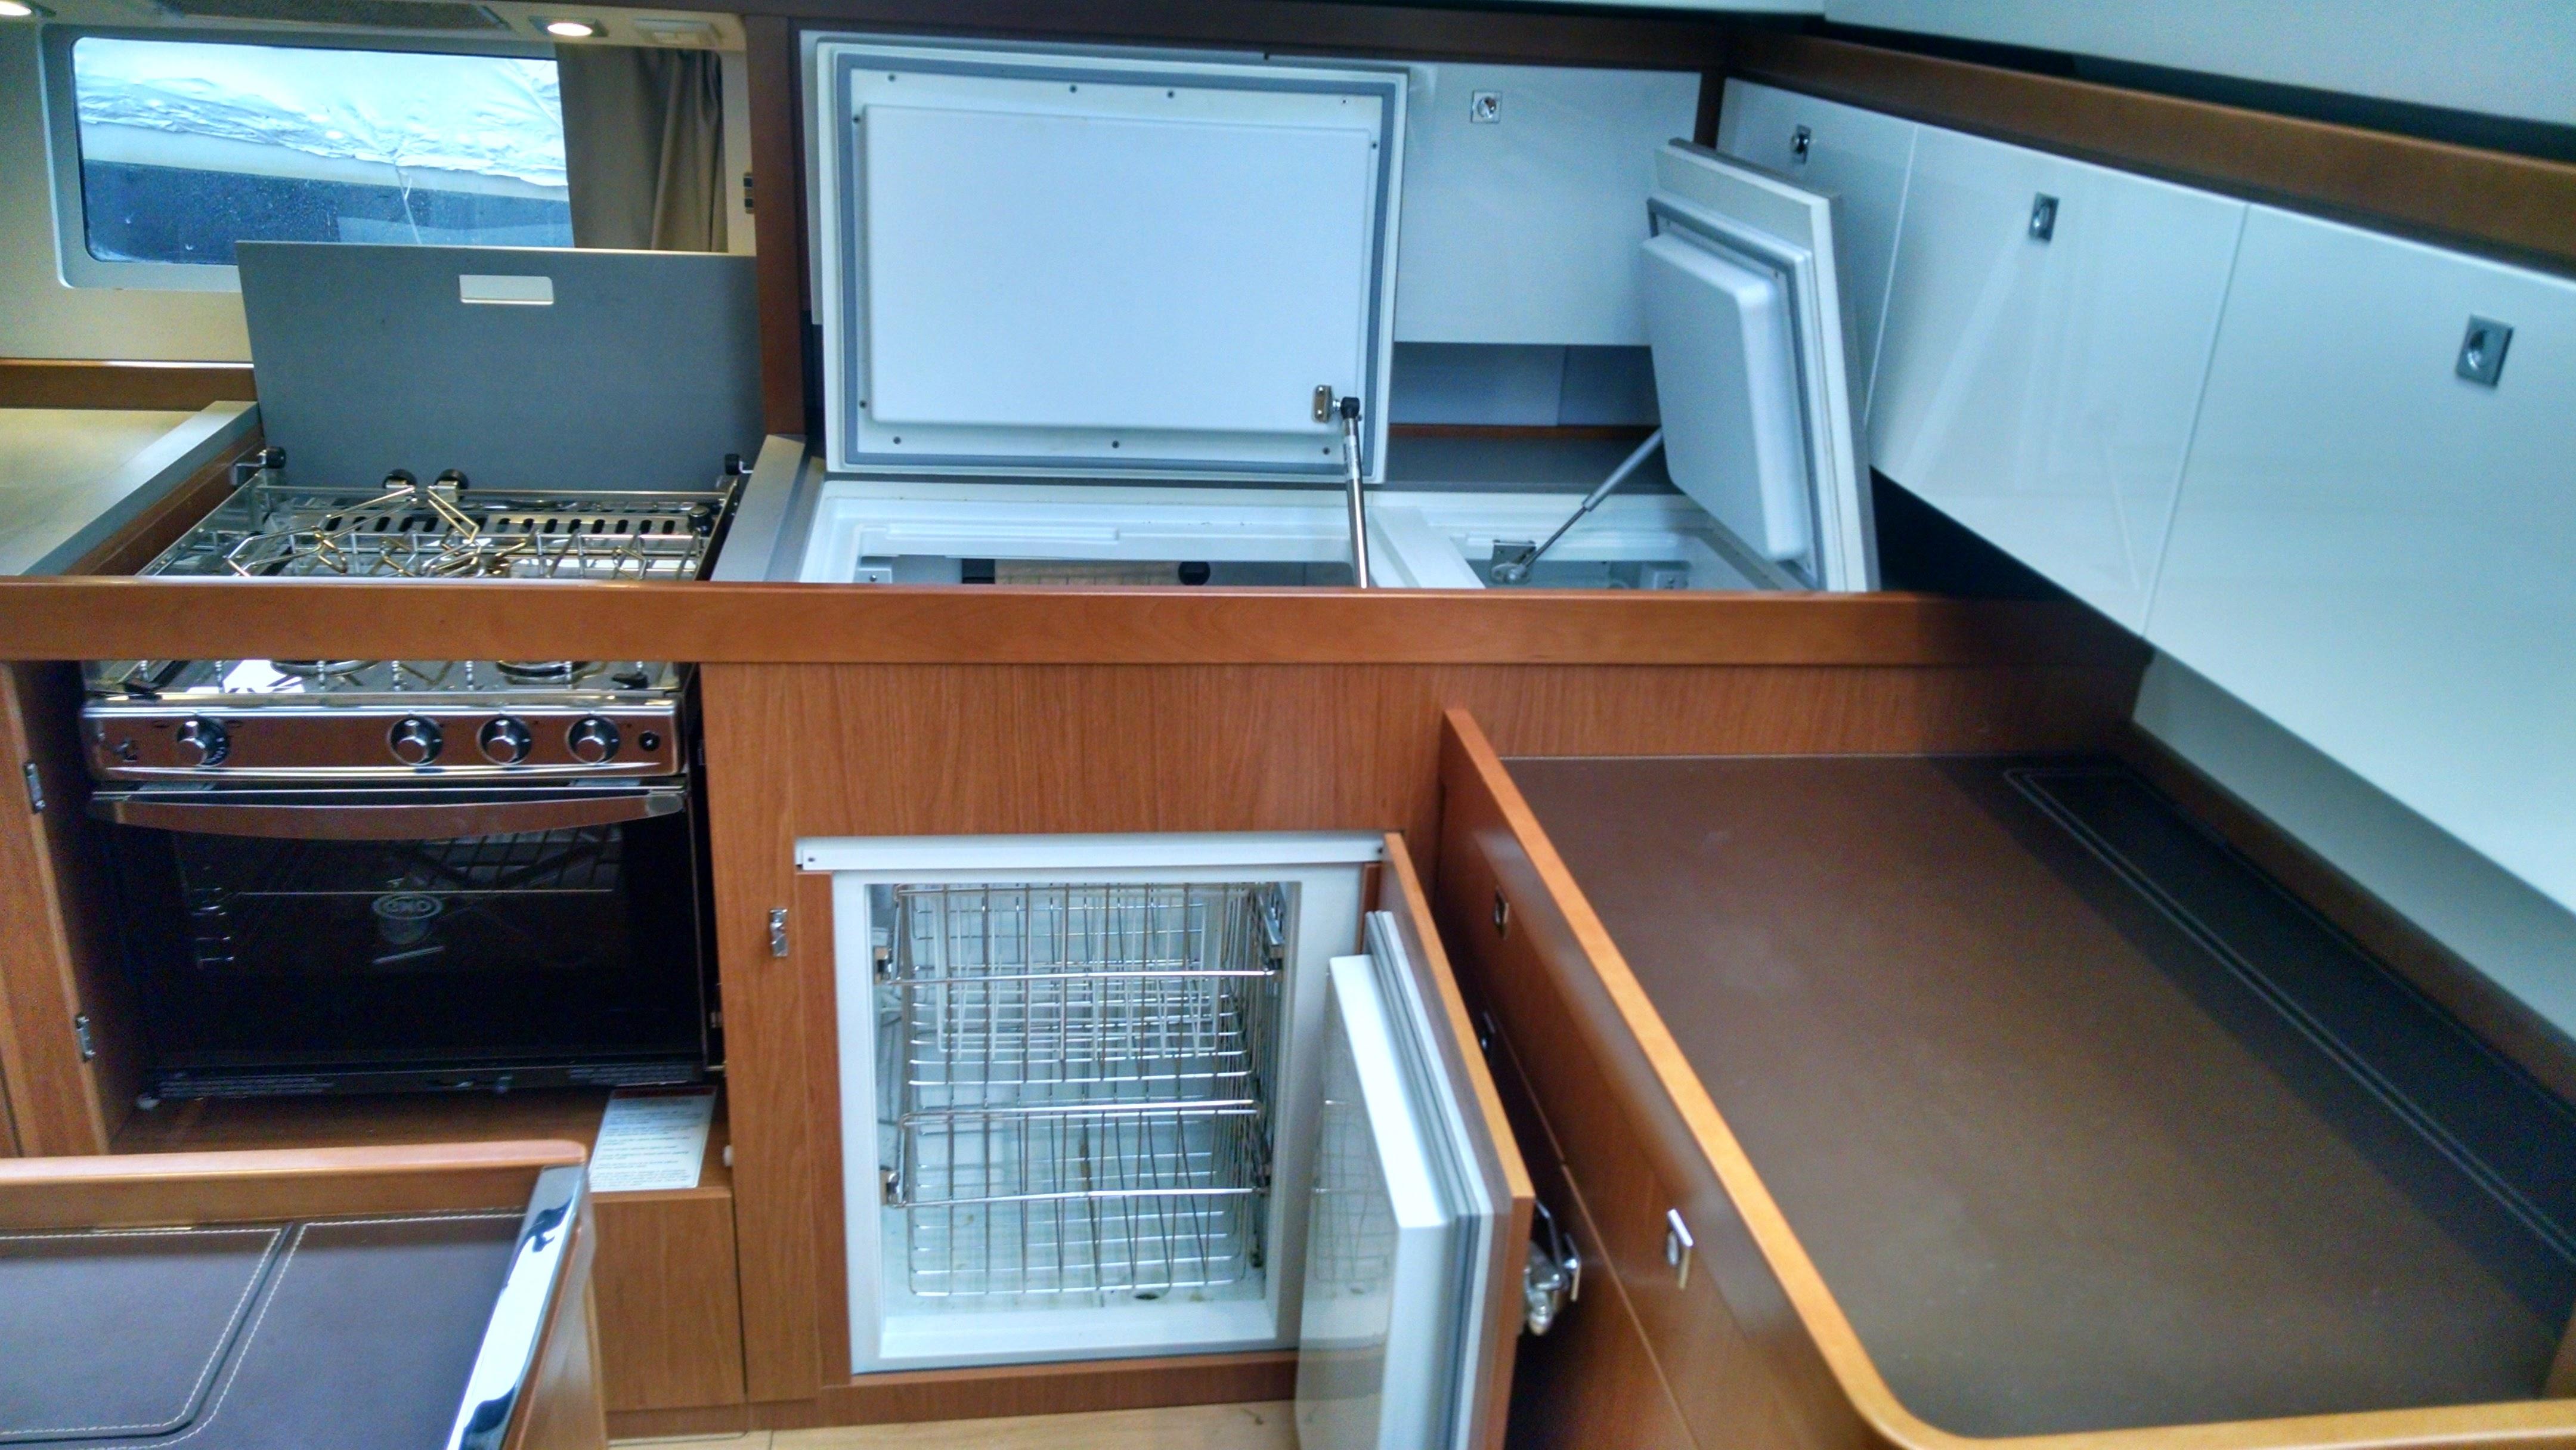 Galley stove top and side load Refrigerator and top load Freezer